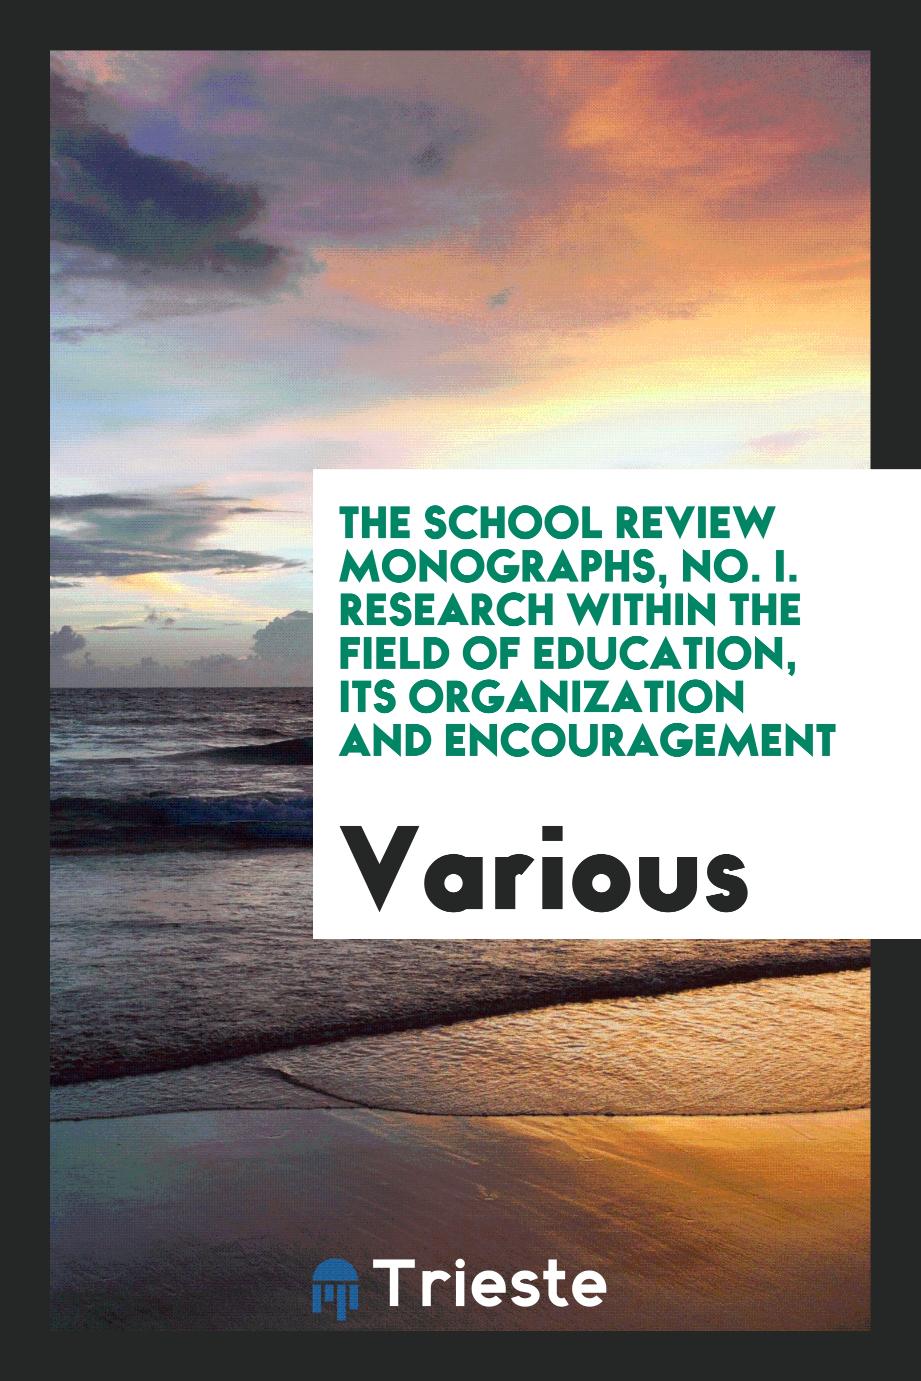 The School Review Monographs, No. I. Research Within the Field of Education, Its Organization and Encouragement